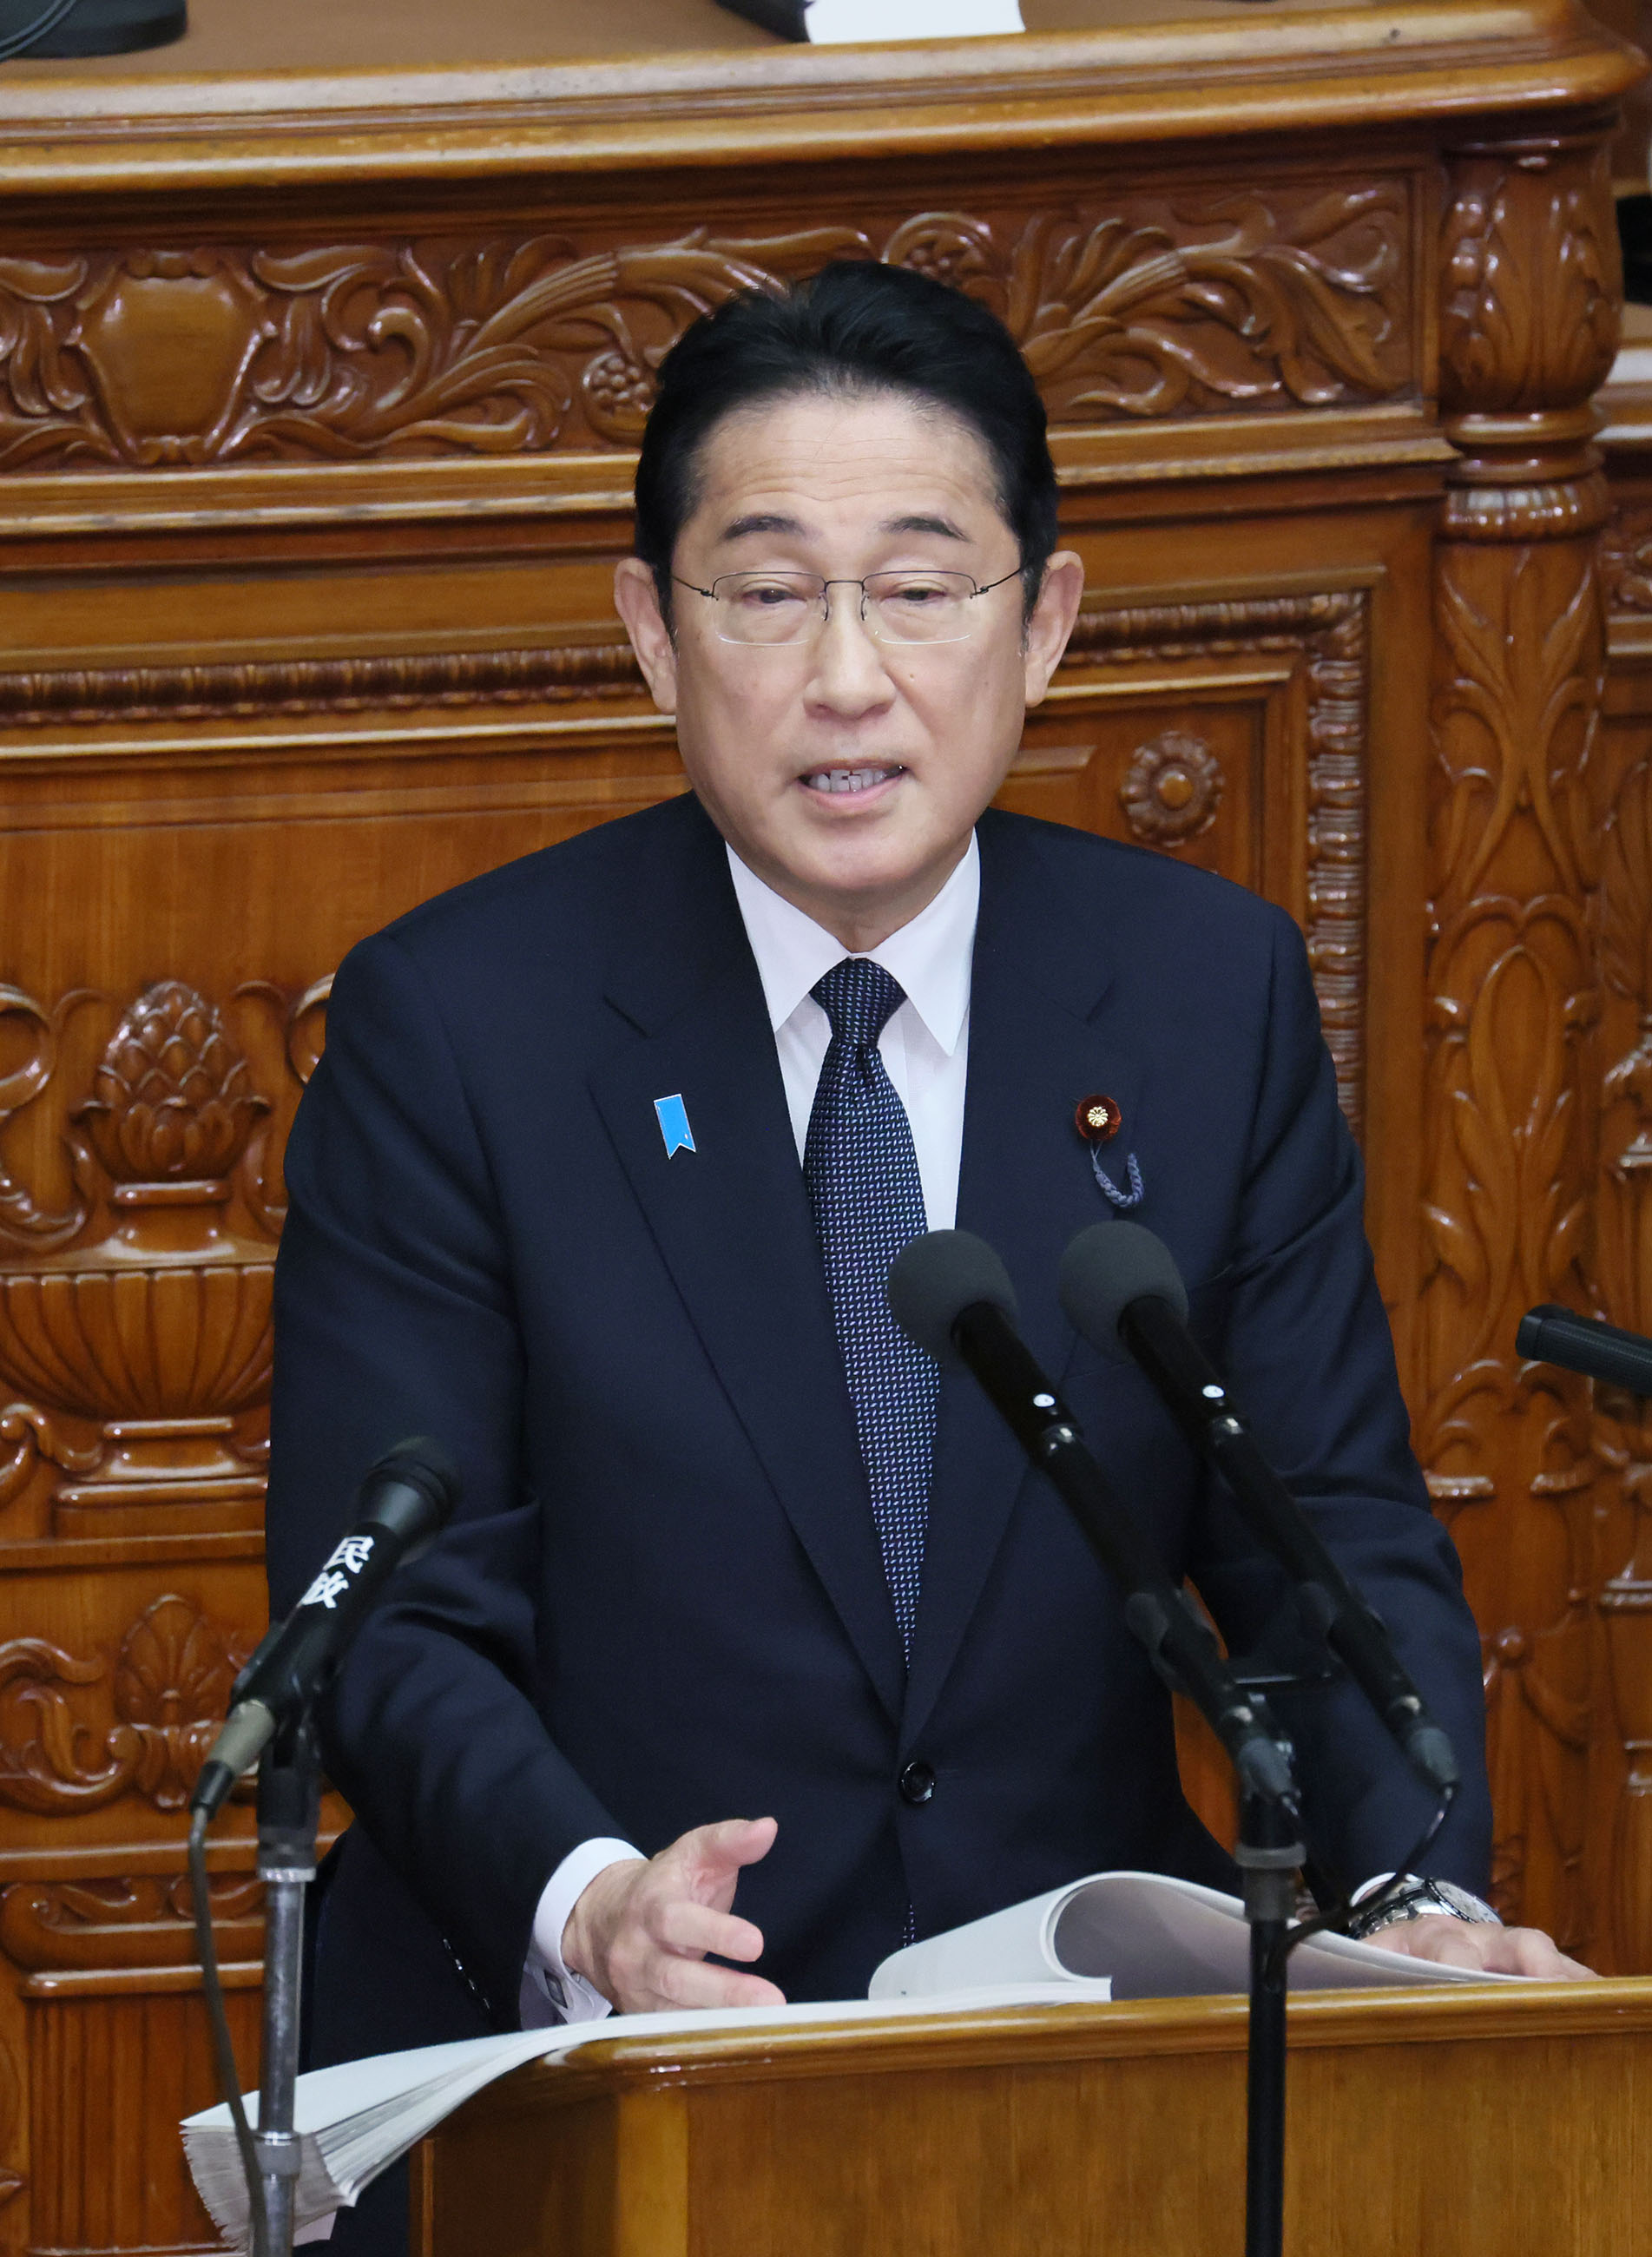 Prime Minister Kishida delivering a policy speech during the plenary session of the House of Representatives (11)